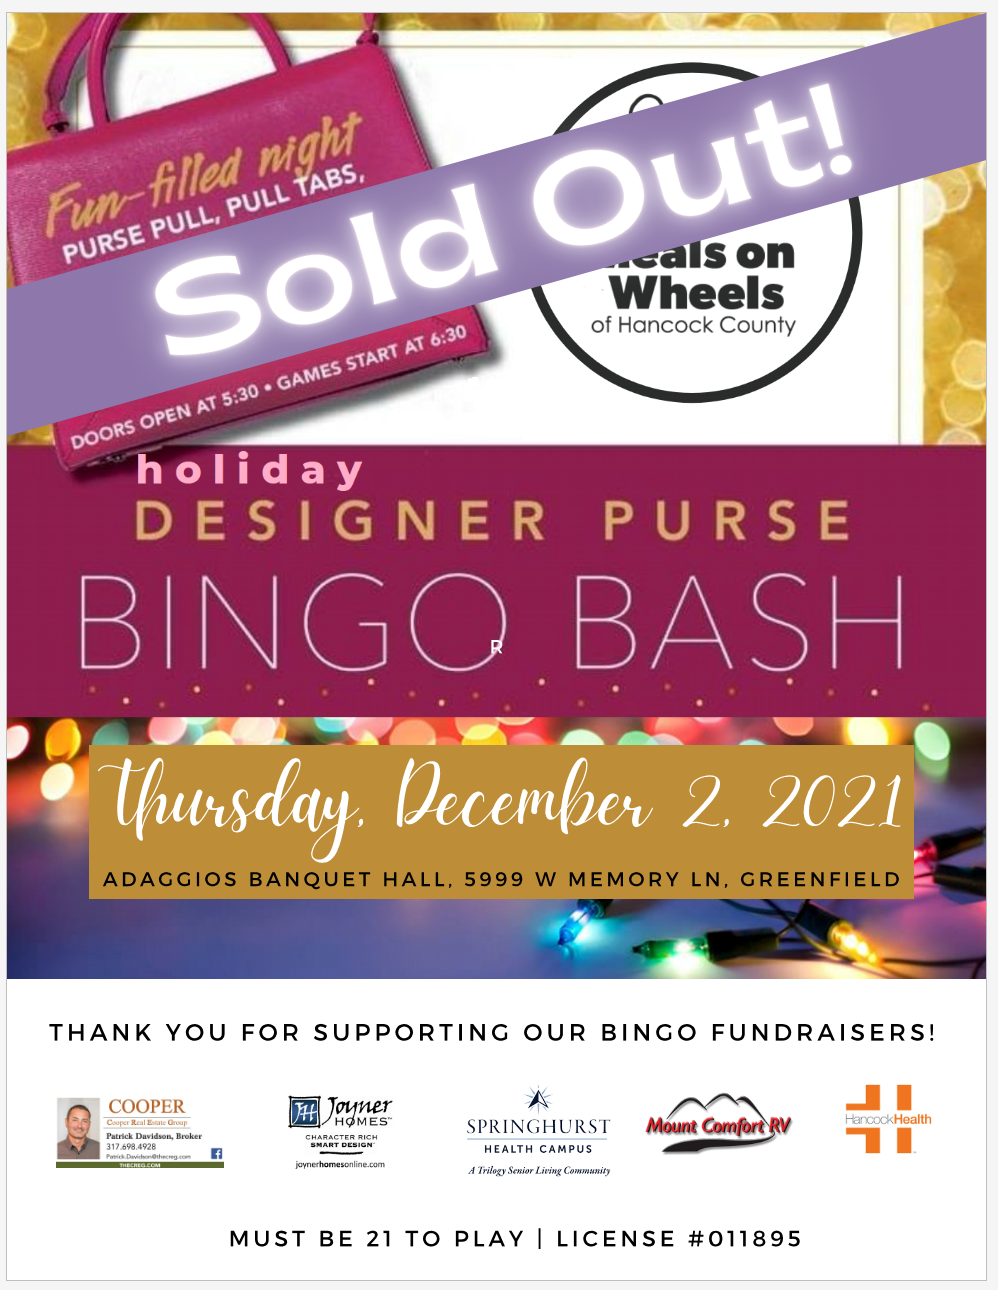 2021 Holiday Bingo Bash_Sold Out